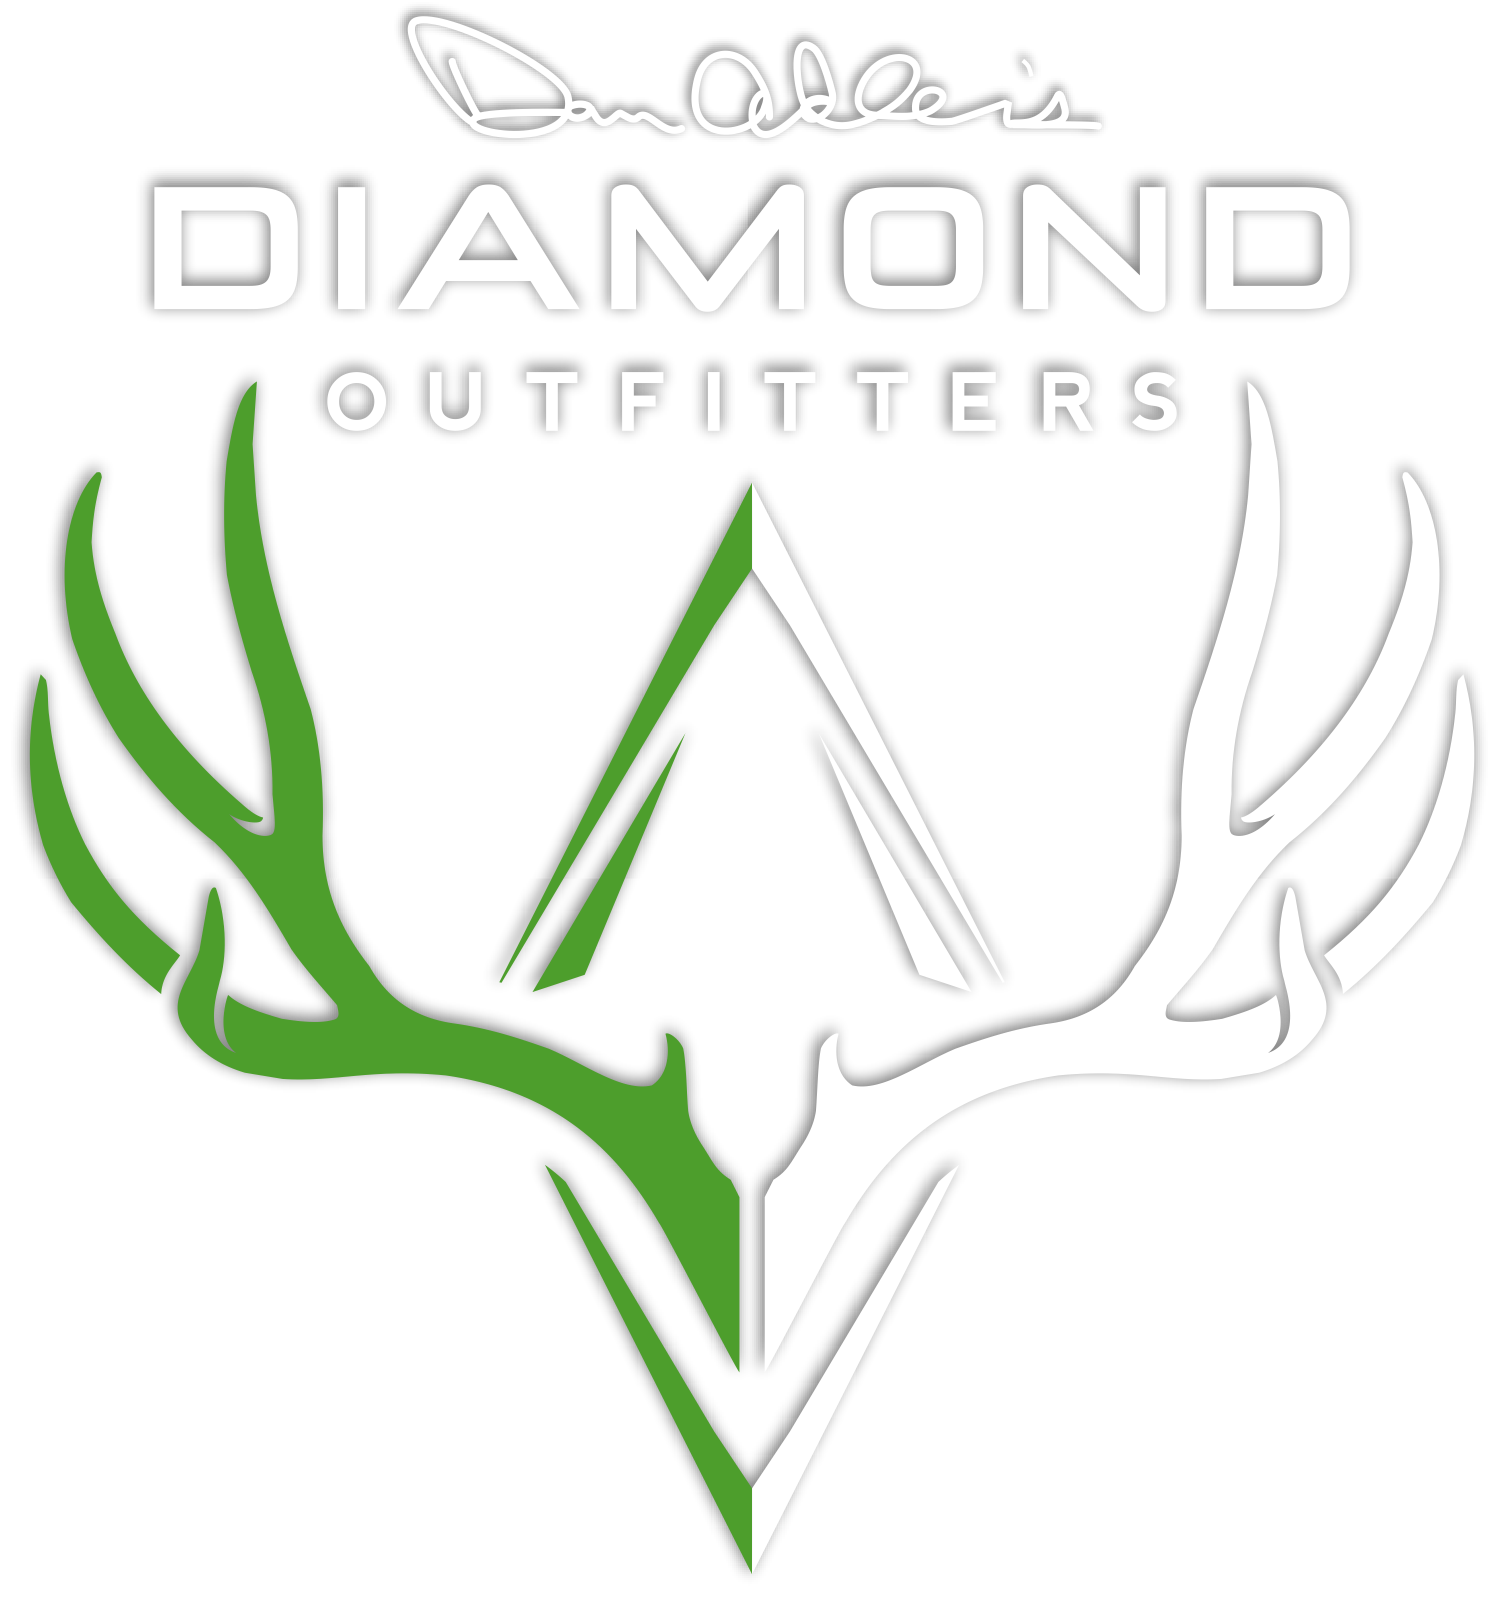 Diamond Outfitters